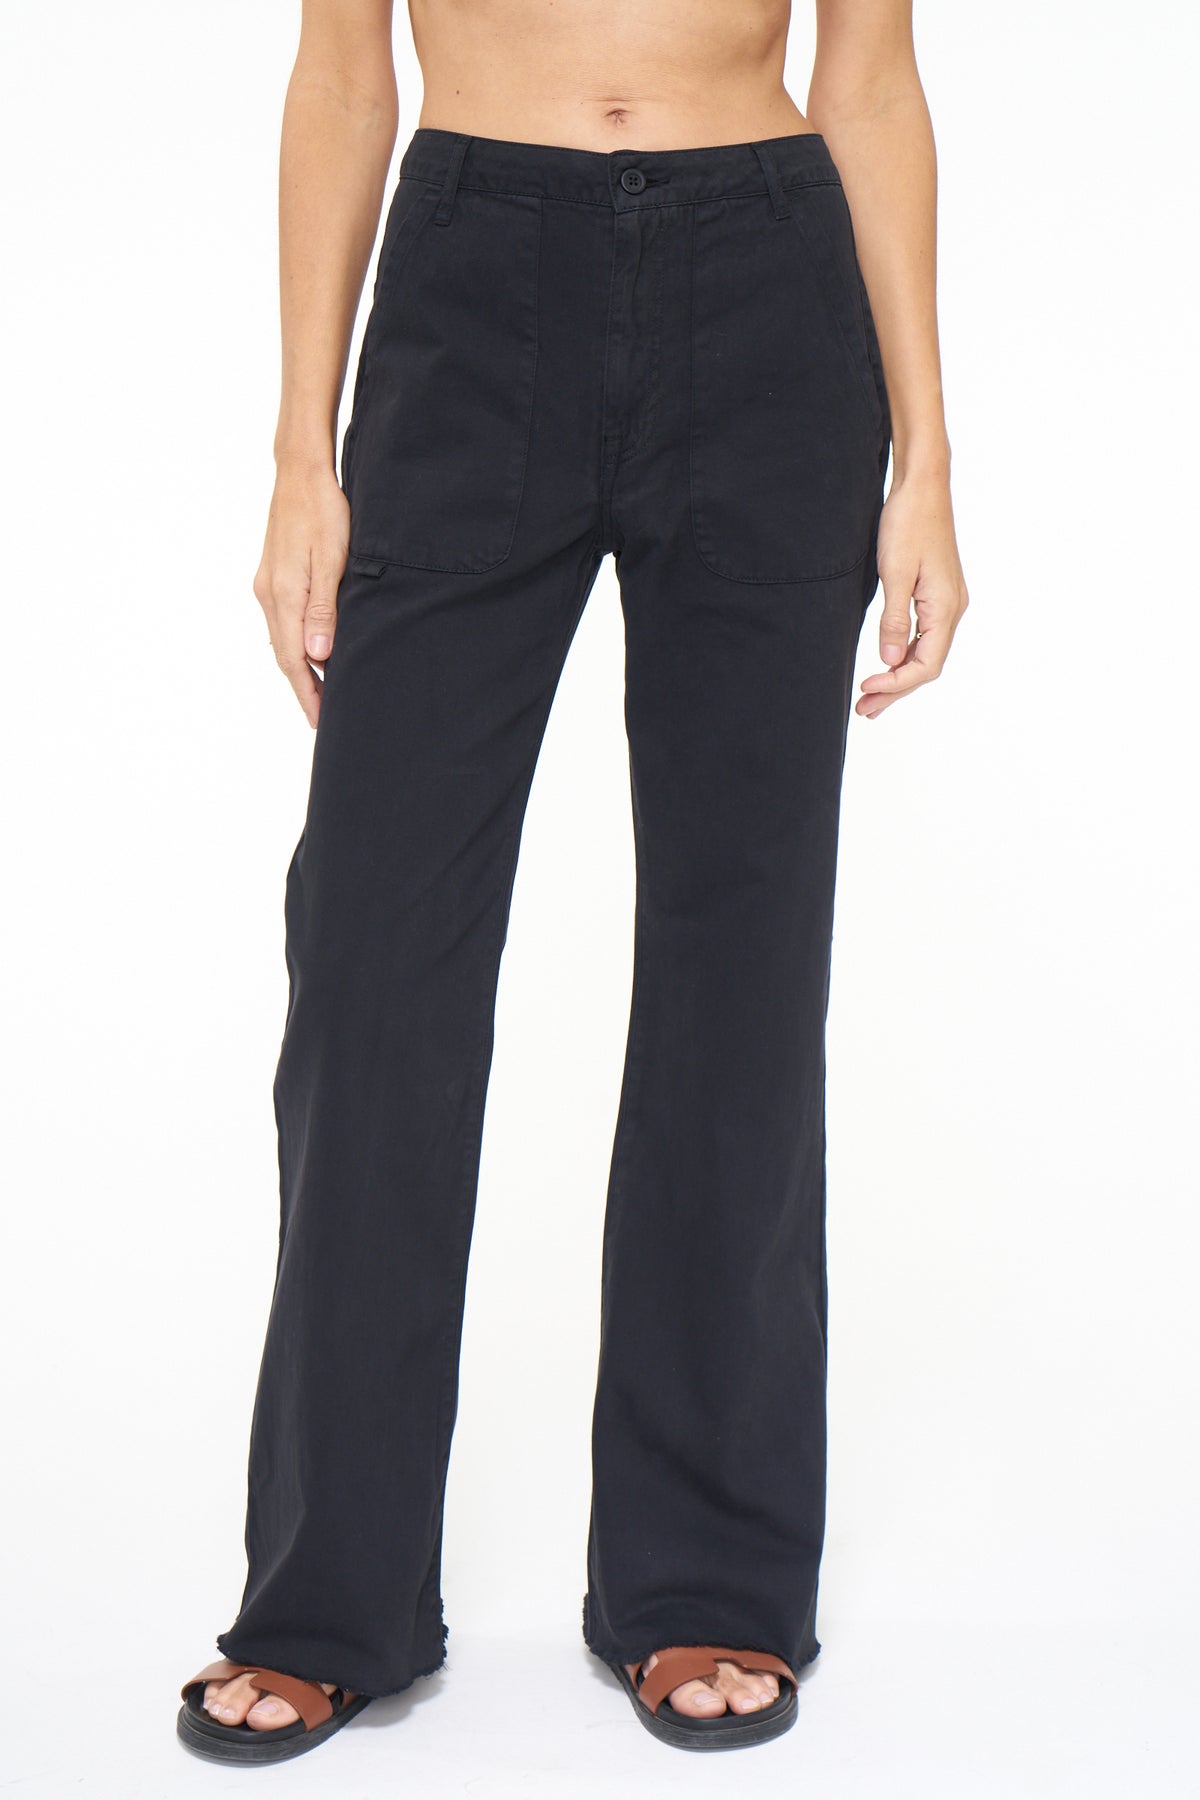 Sasha High Rise Relaxed Flare - Fade to Black